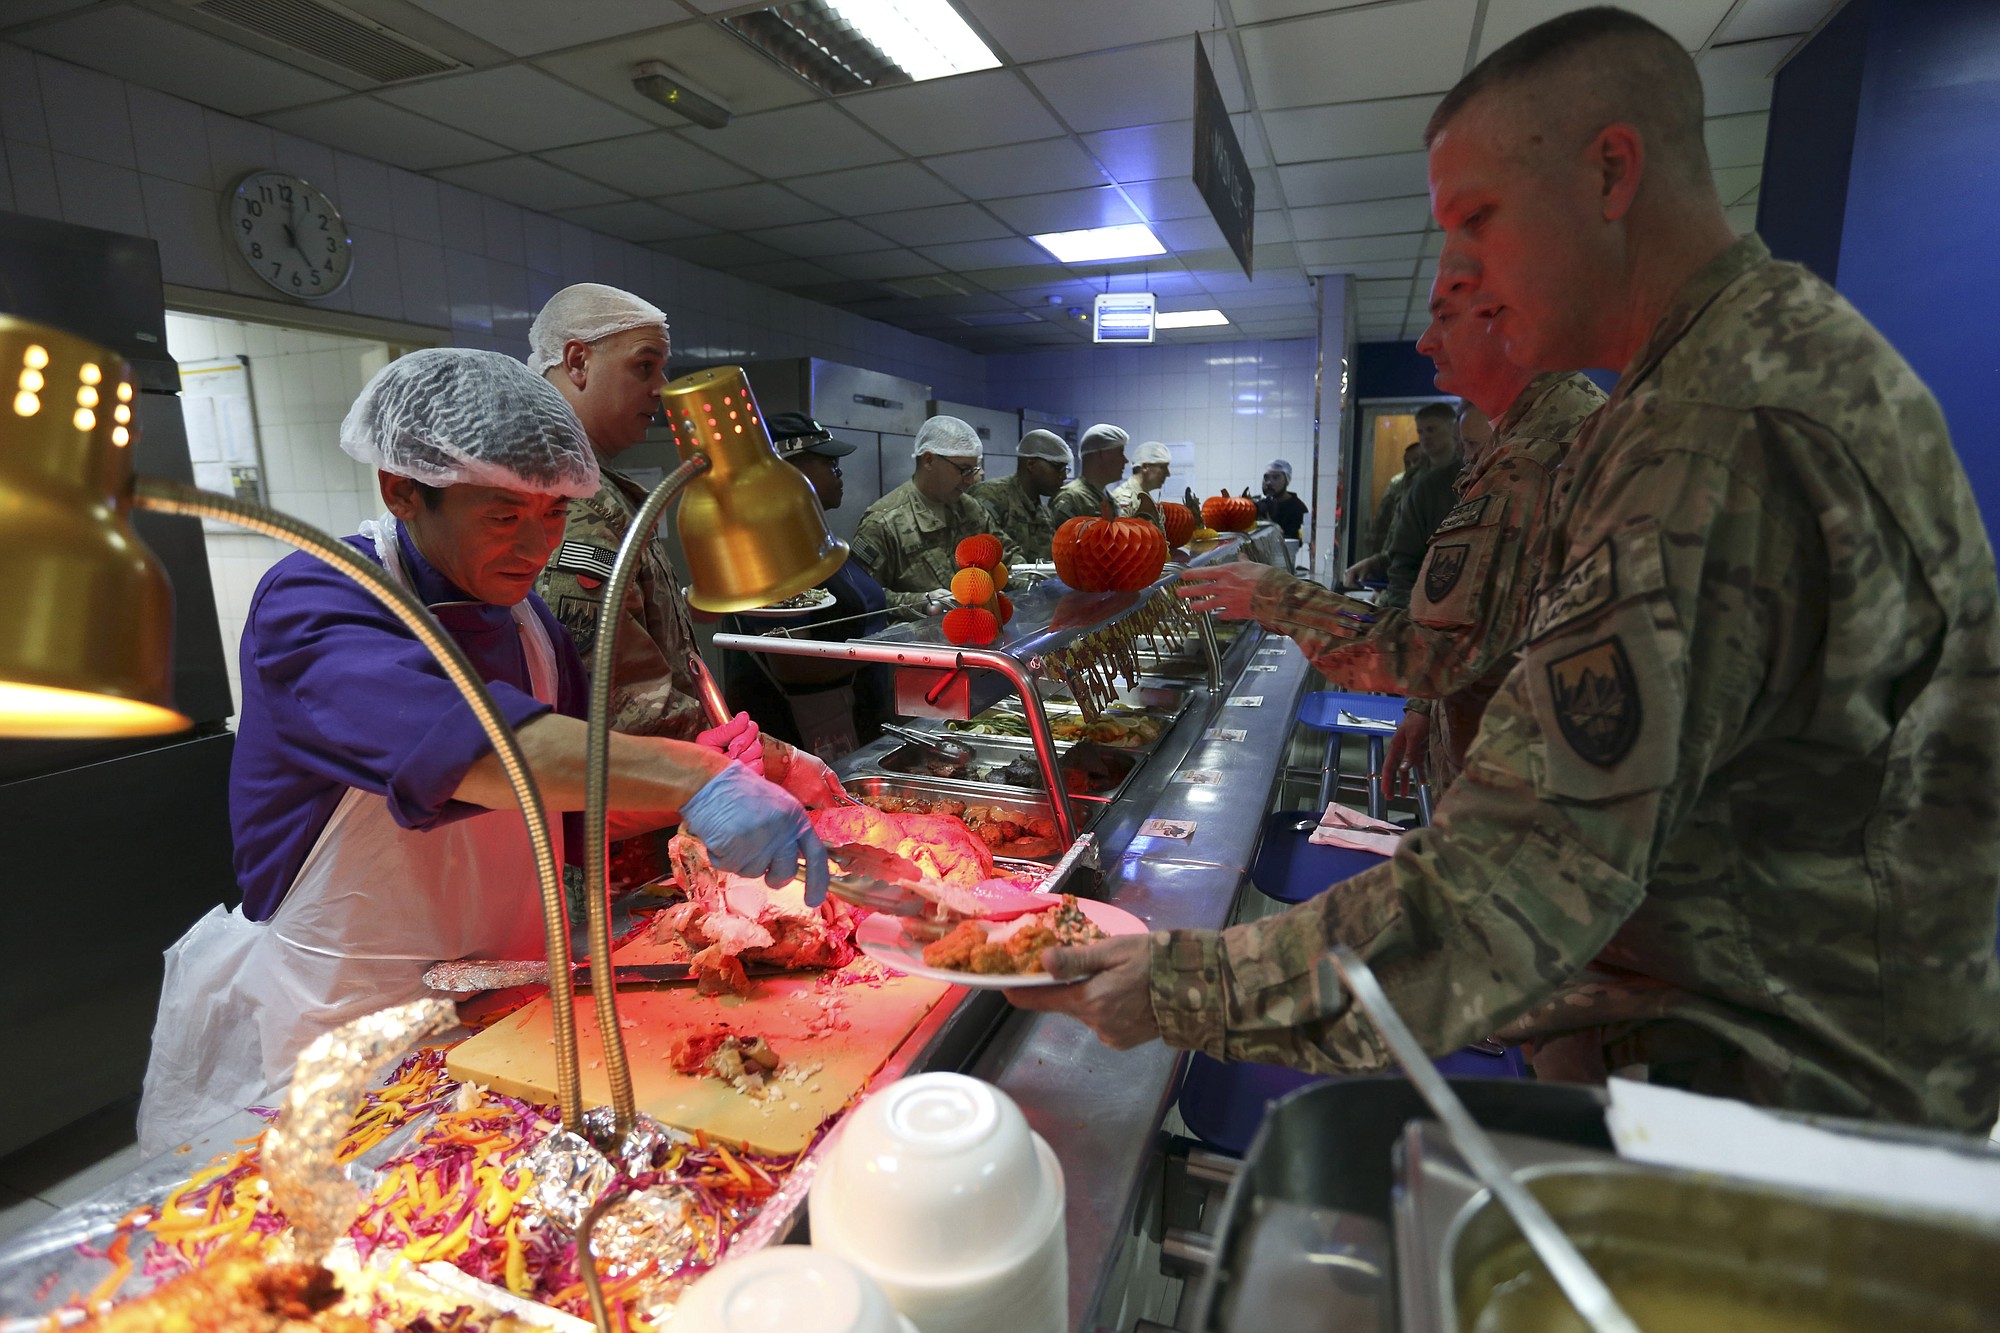 NATO soldiers line up to get Thanksgiving Day meals Thursday at the ISAF headquarters in Kabul, Afghanistan.